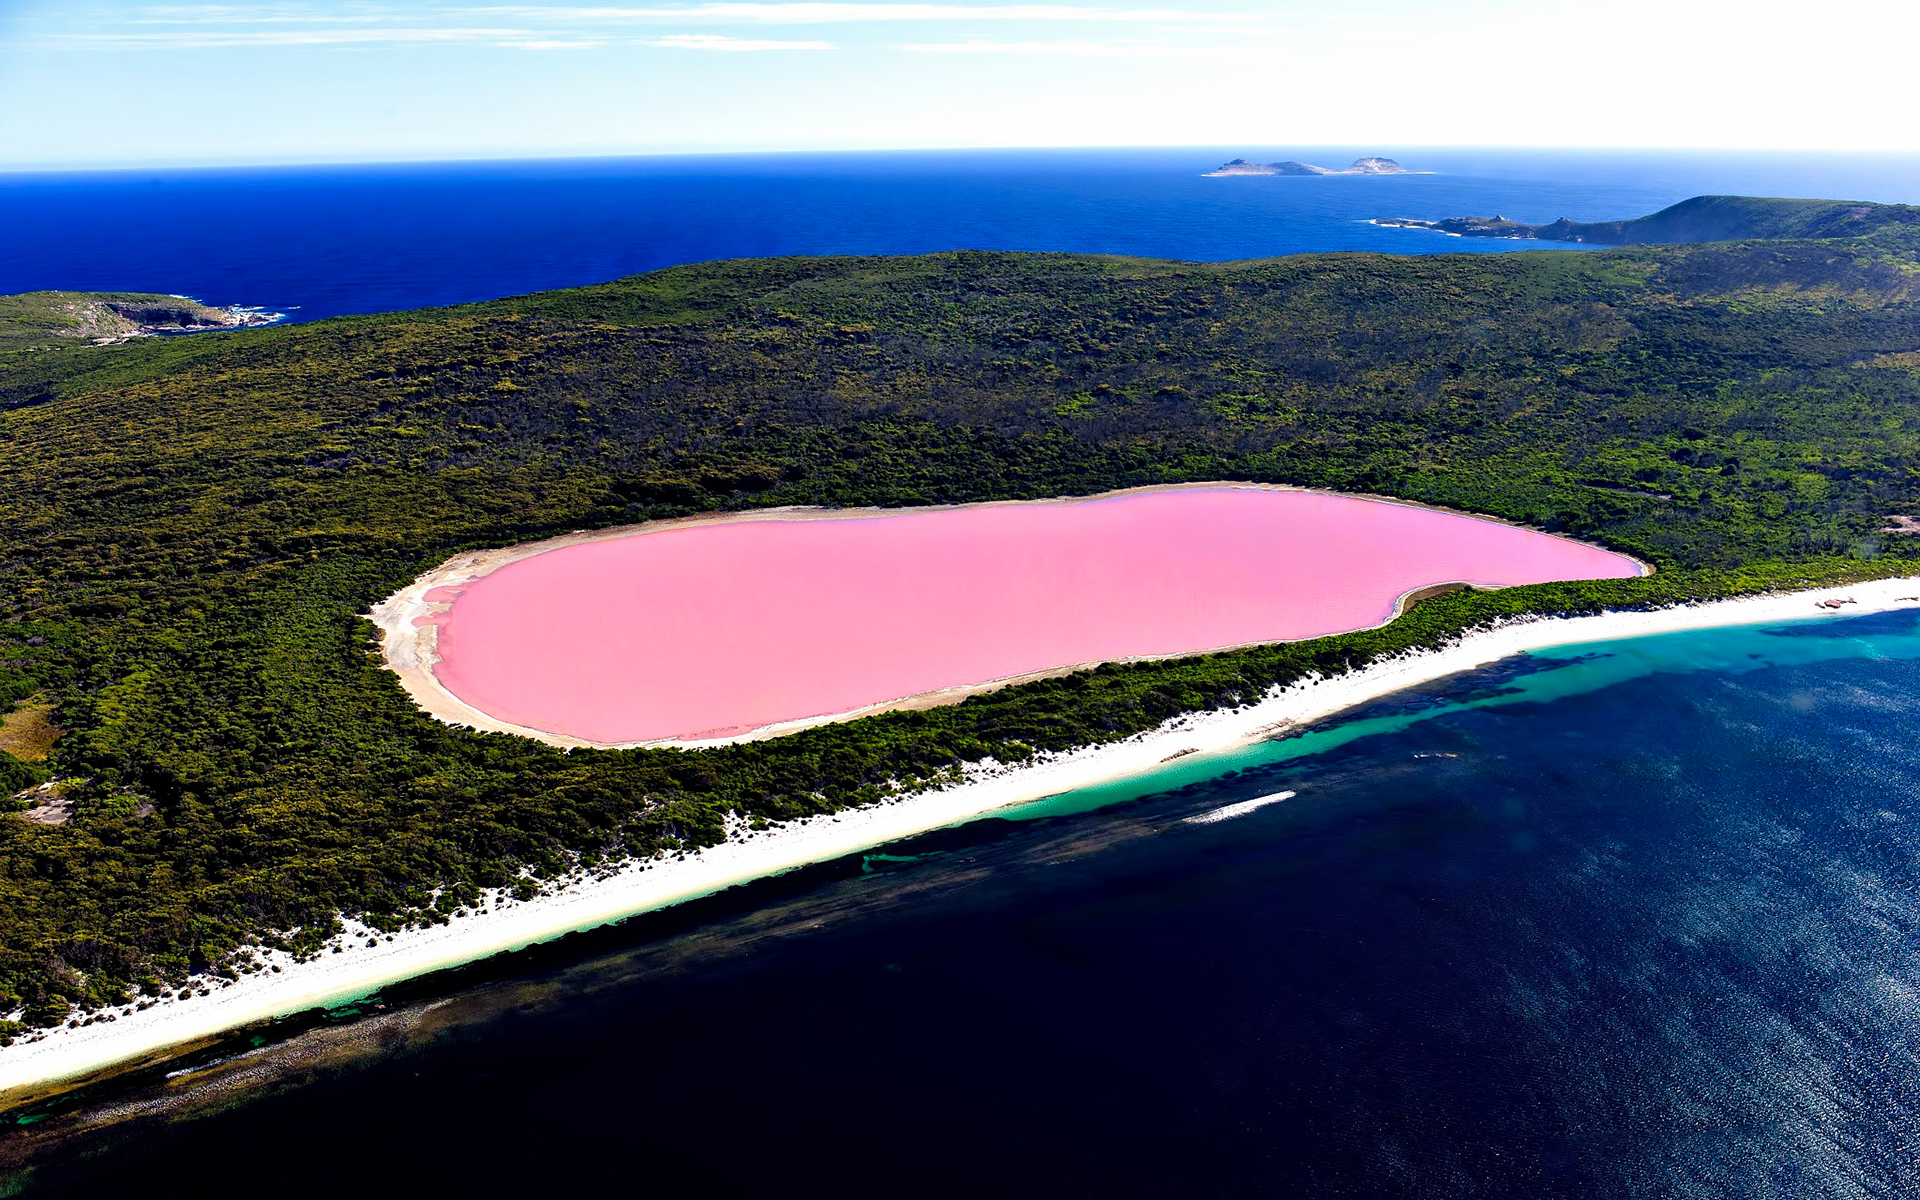 The pink lake Hillier in Australia